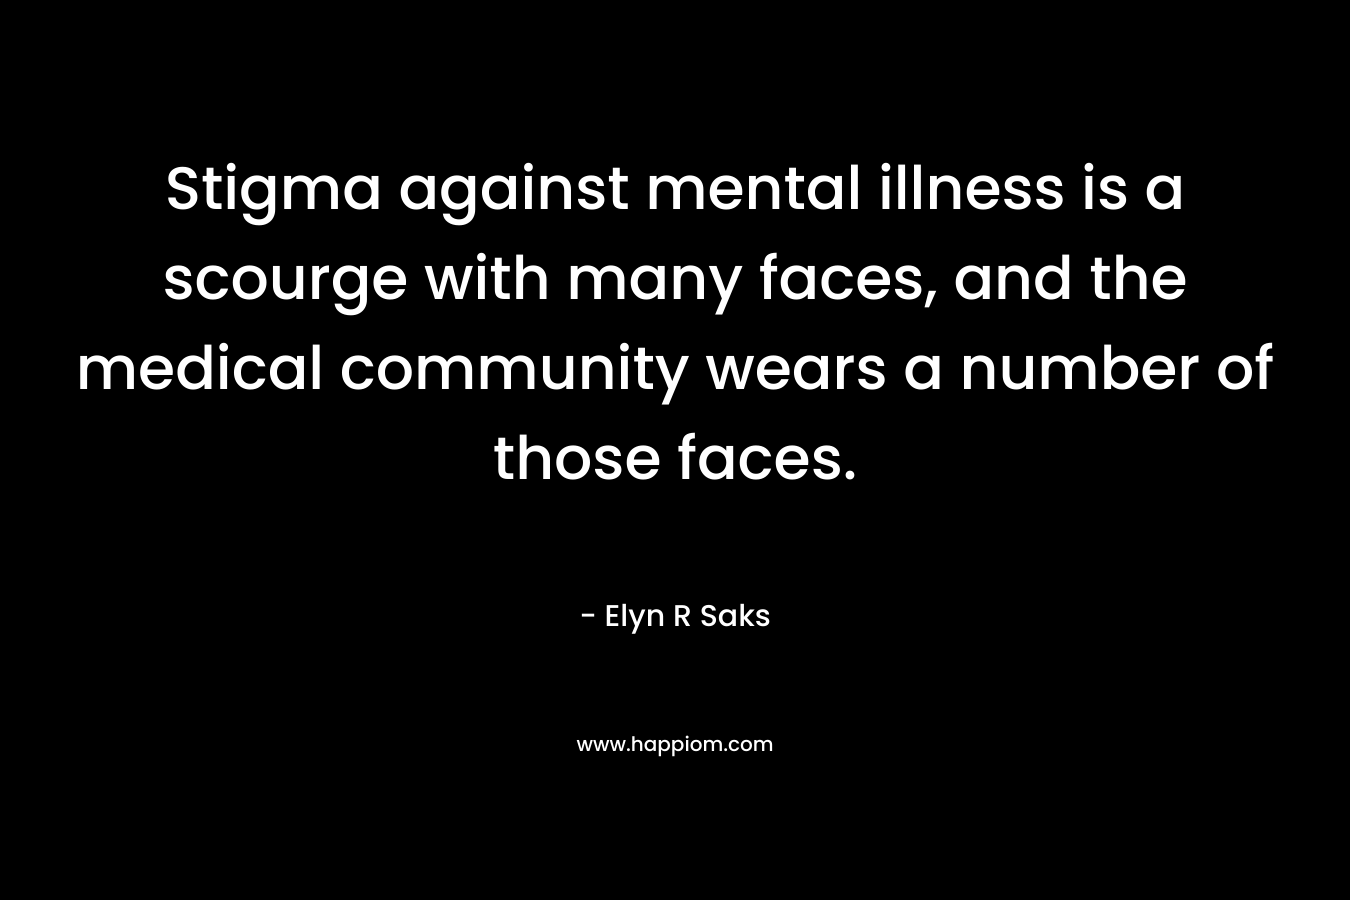 Stigma against mental illness is a scourge with many faces, and the medical community wears a number of those faces. – Elyn R Saks